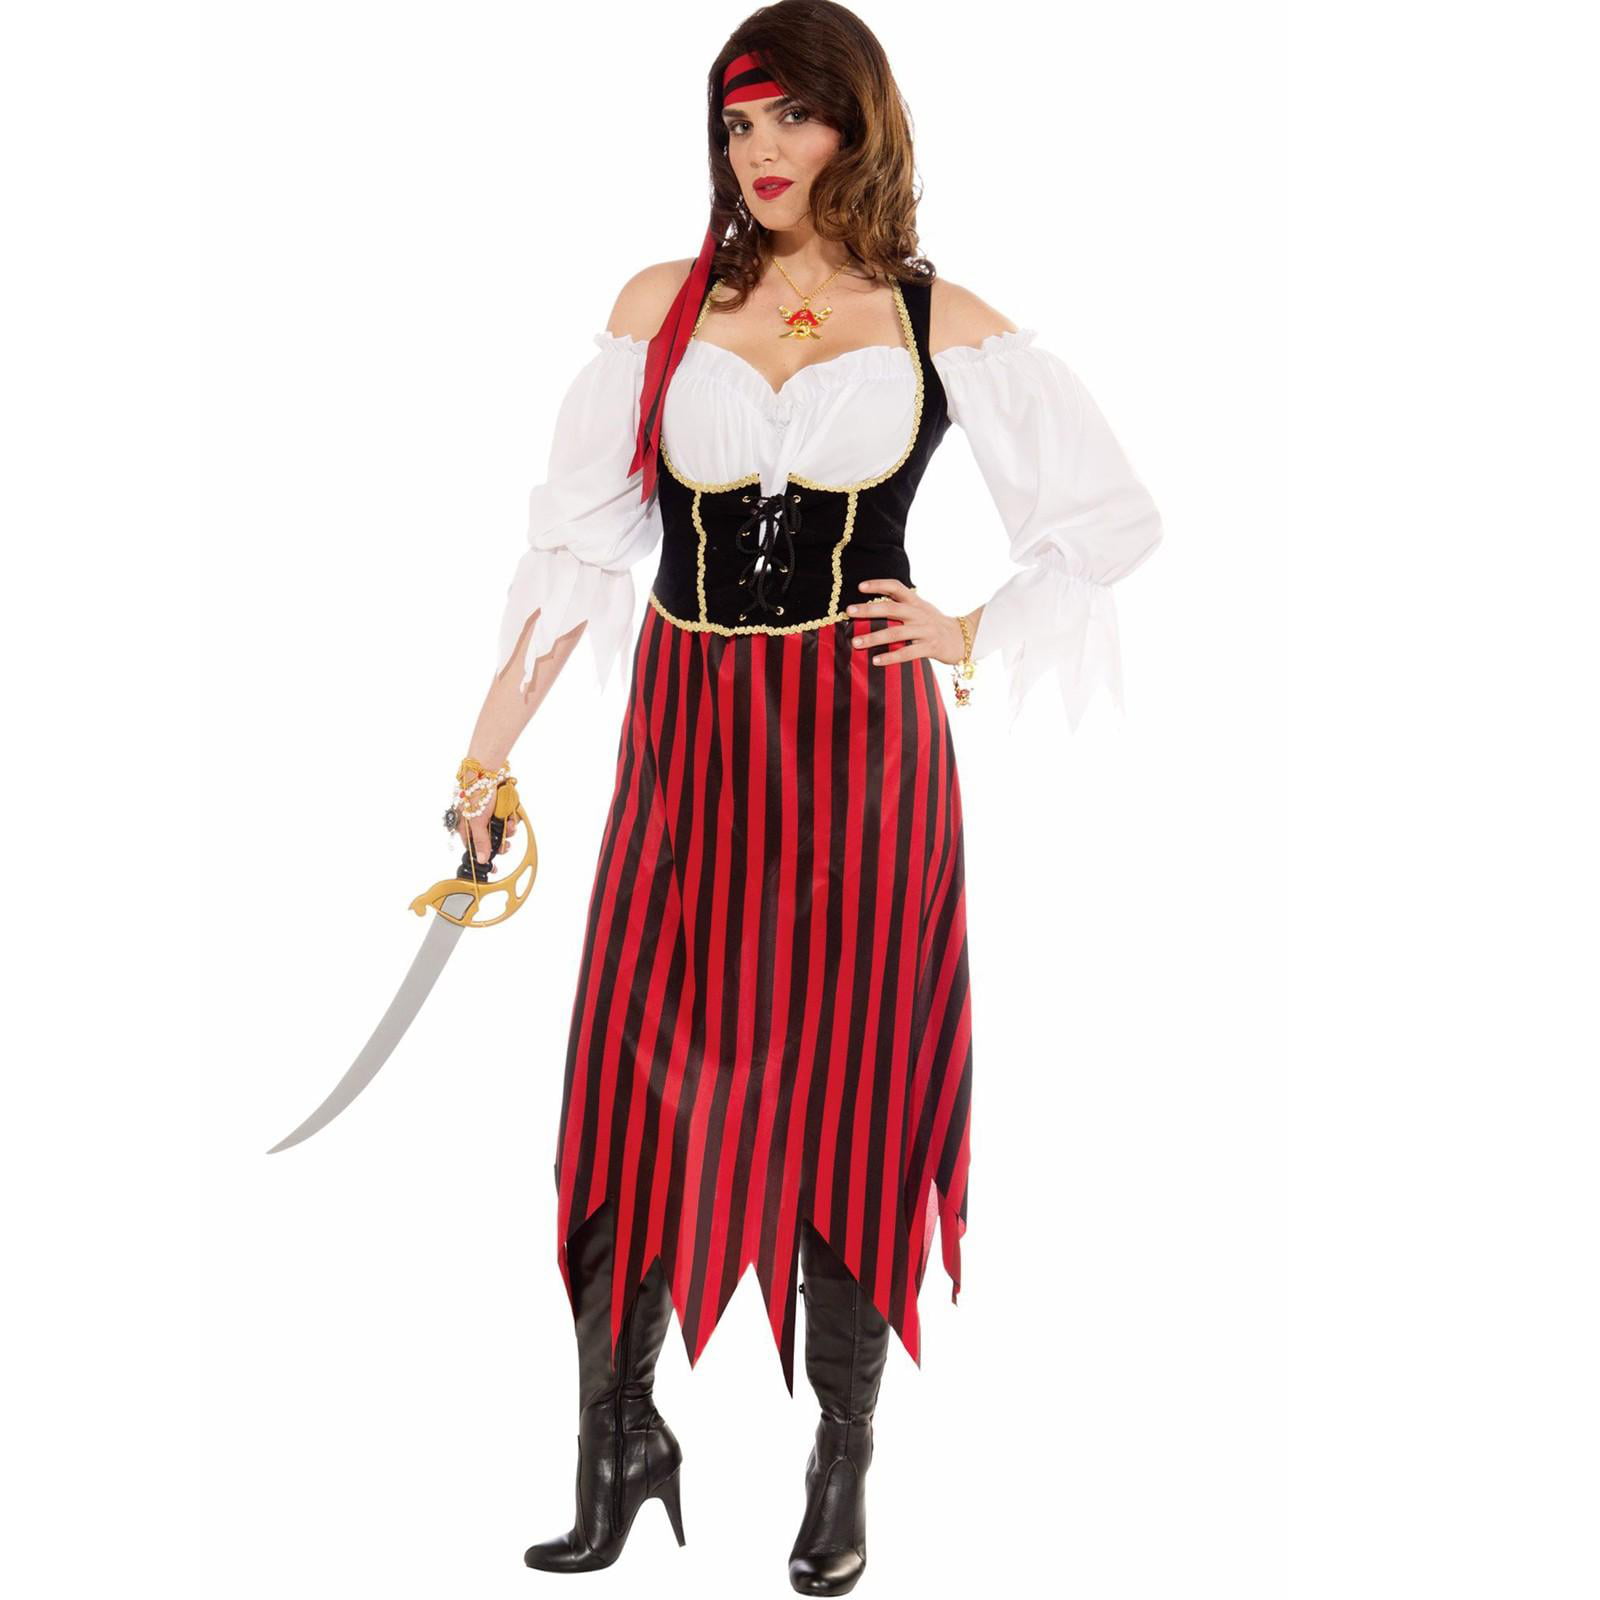 Buccaneer Beauty Pirate Black Red Plus Size Dress Up Halloween Adult Costume 